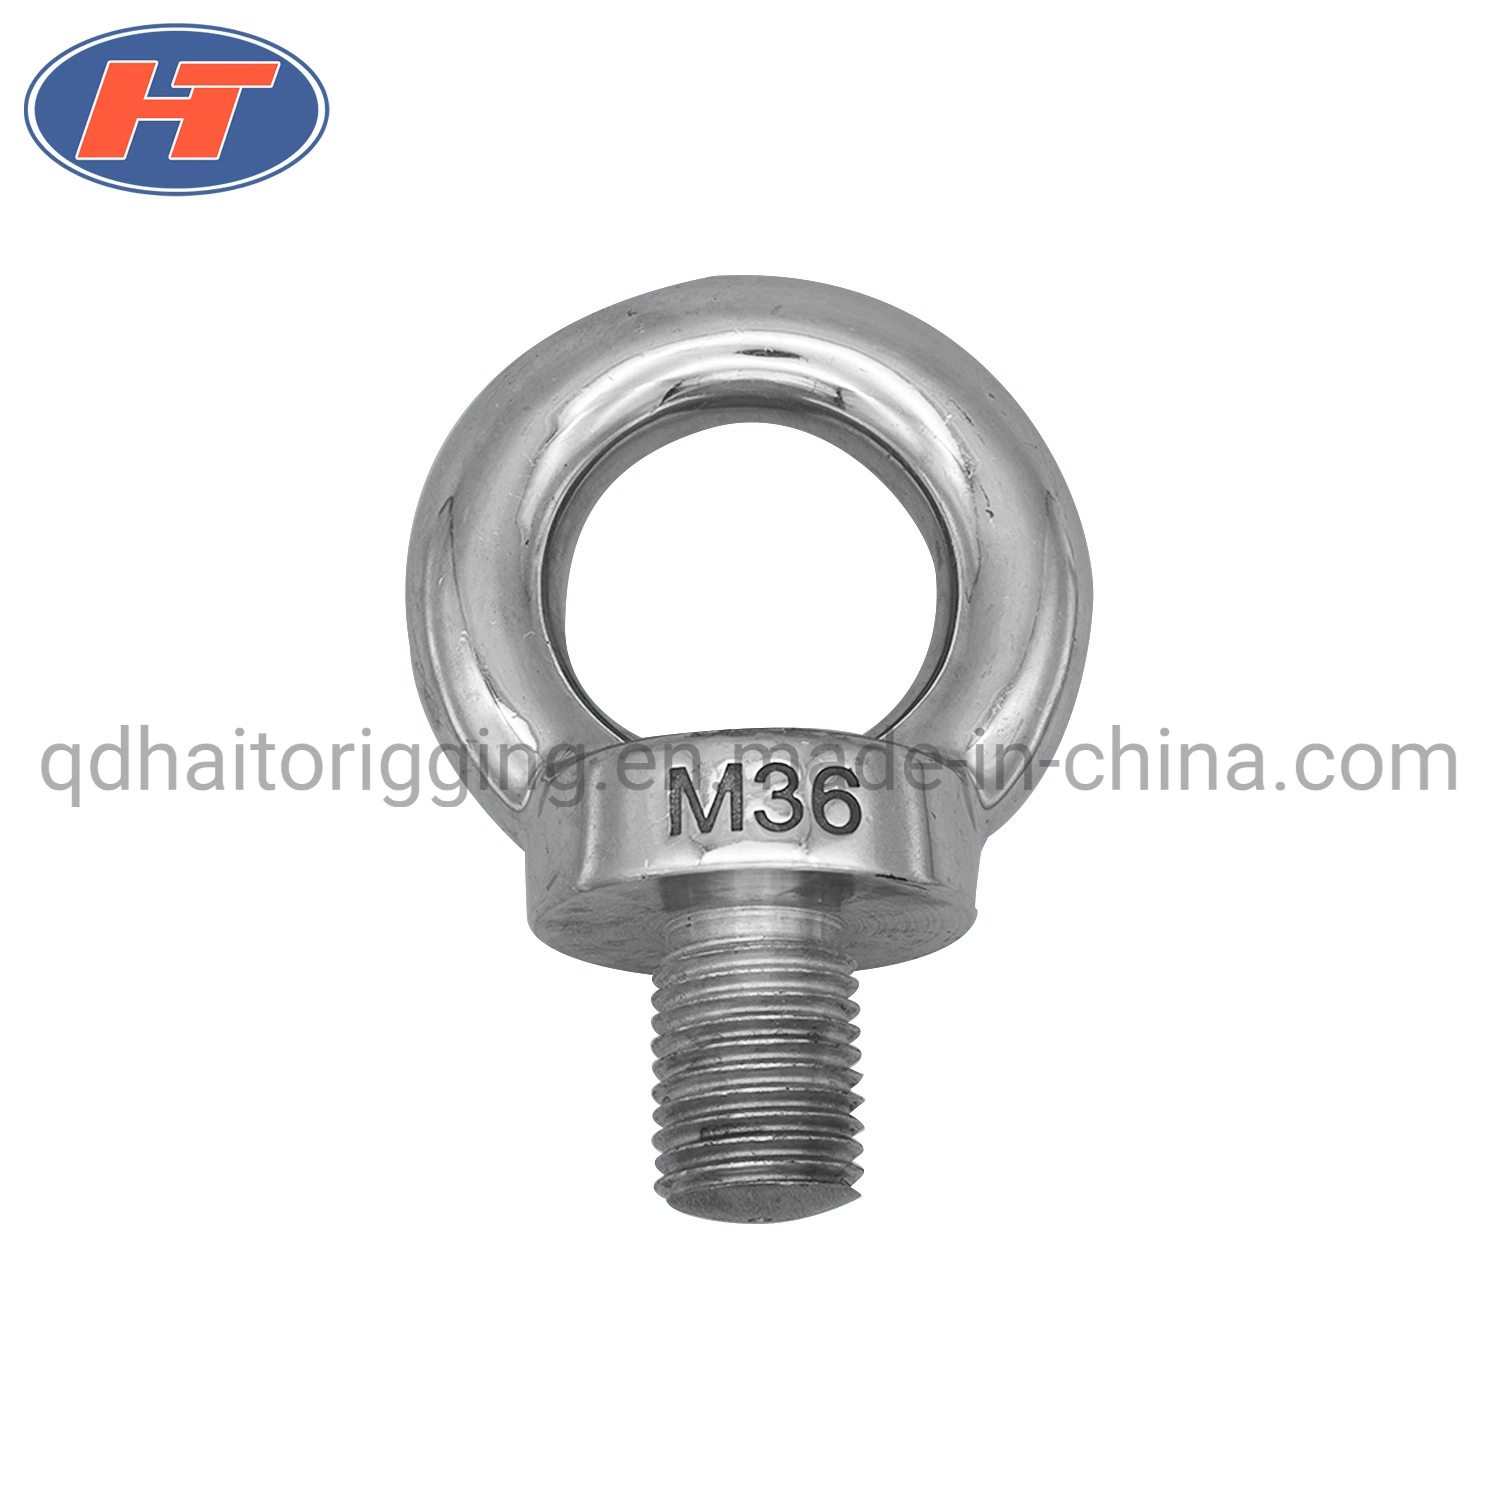 Stainless Steel 304/316 DIN580 Lifting Eye Bolt of Rigging Hardware